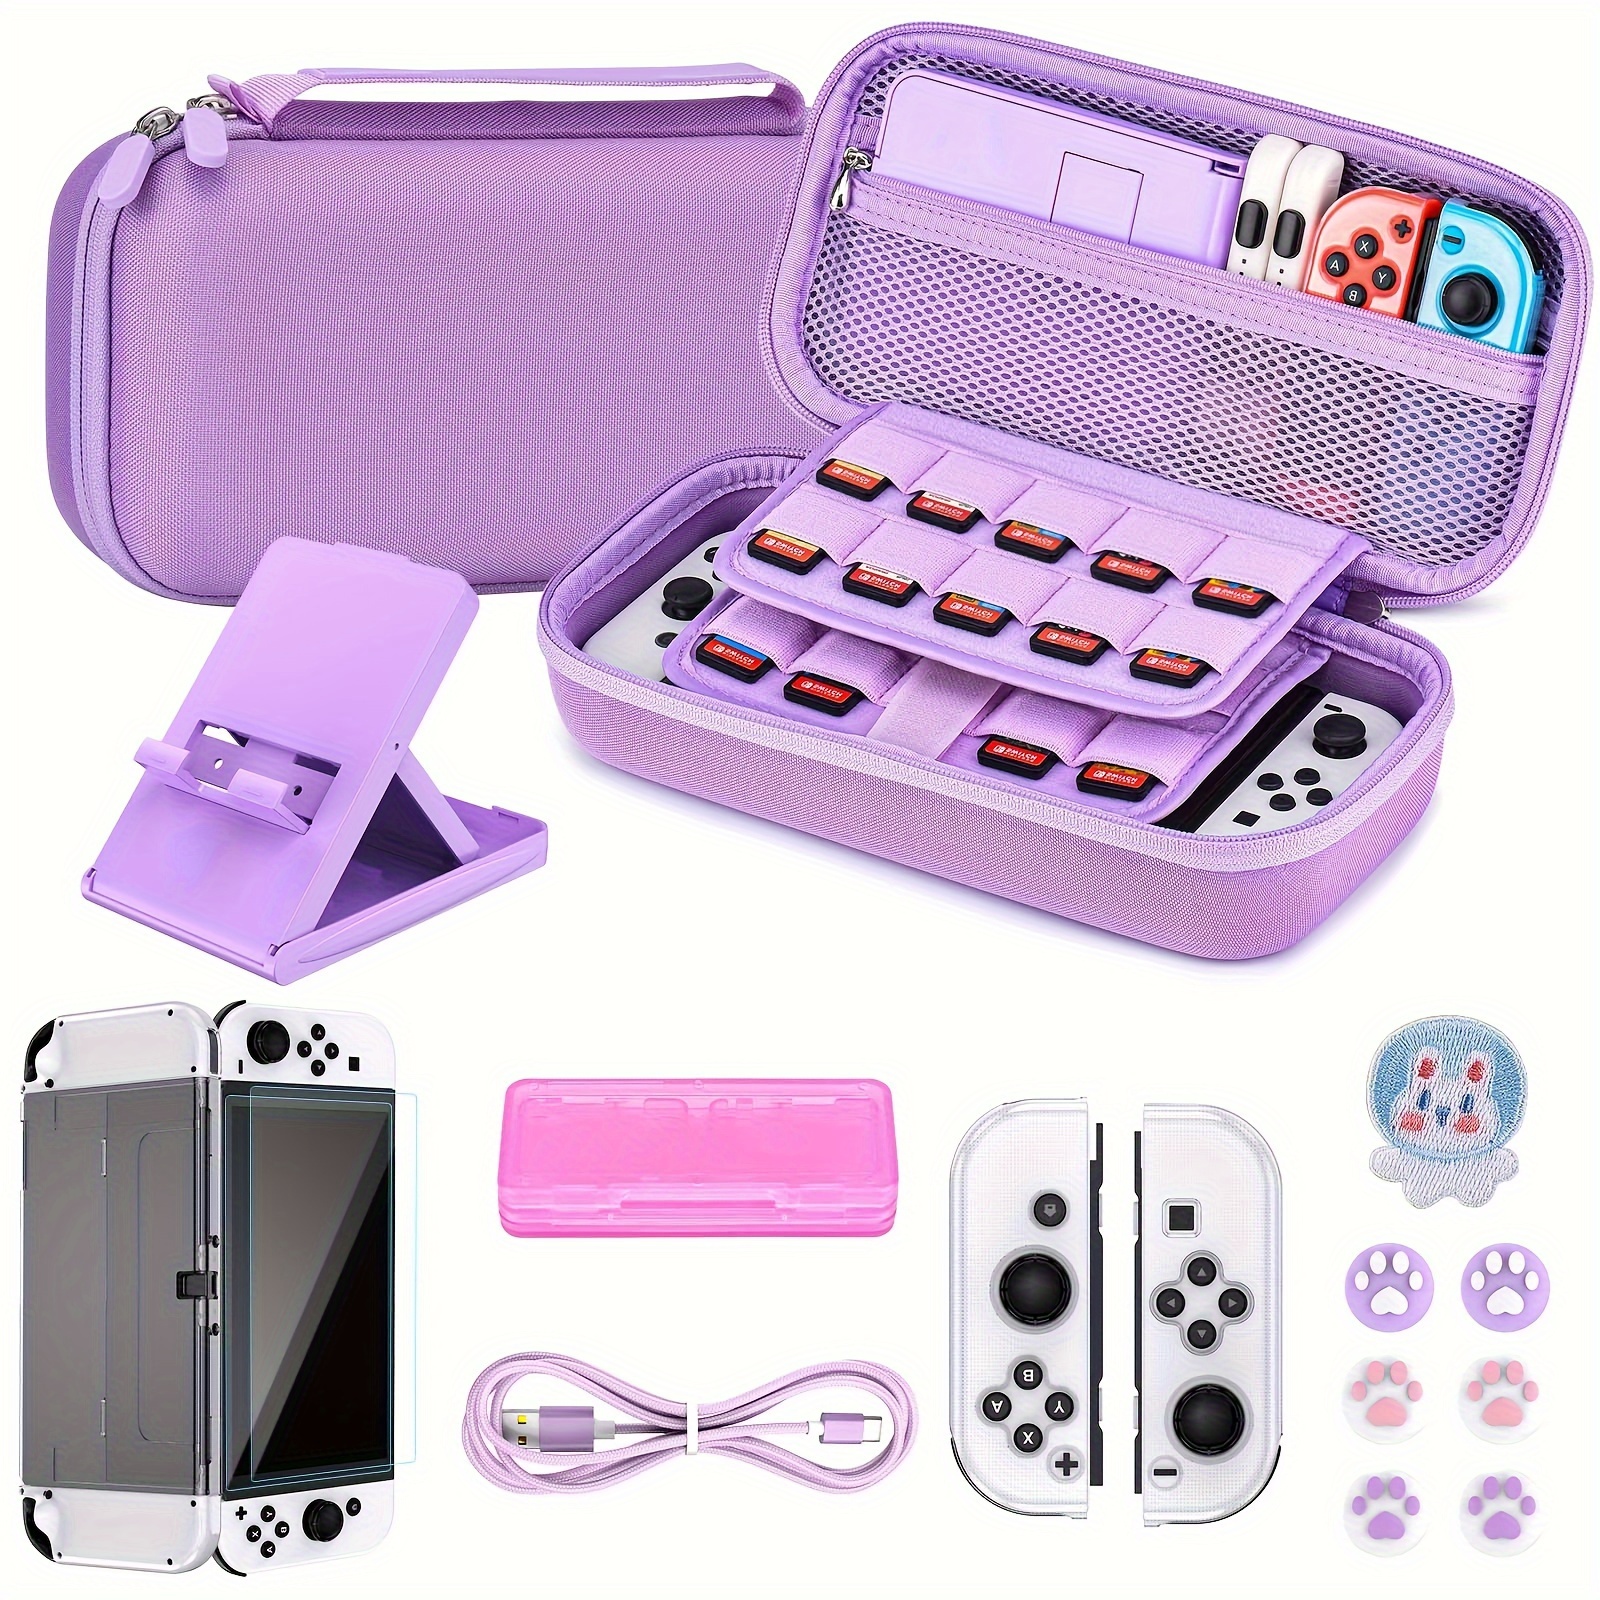 

16 In 1 Oled Accessories Bundle, Oled Accessories Kit Include Oled Carrying Case, Adjustable Stand, Protective Case For Oled Console - Middle Purple